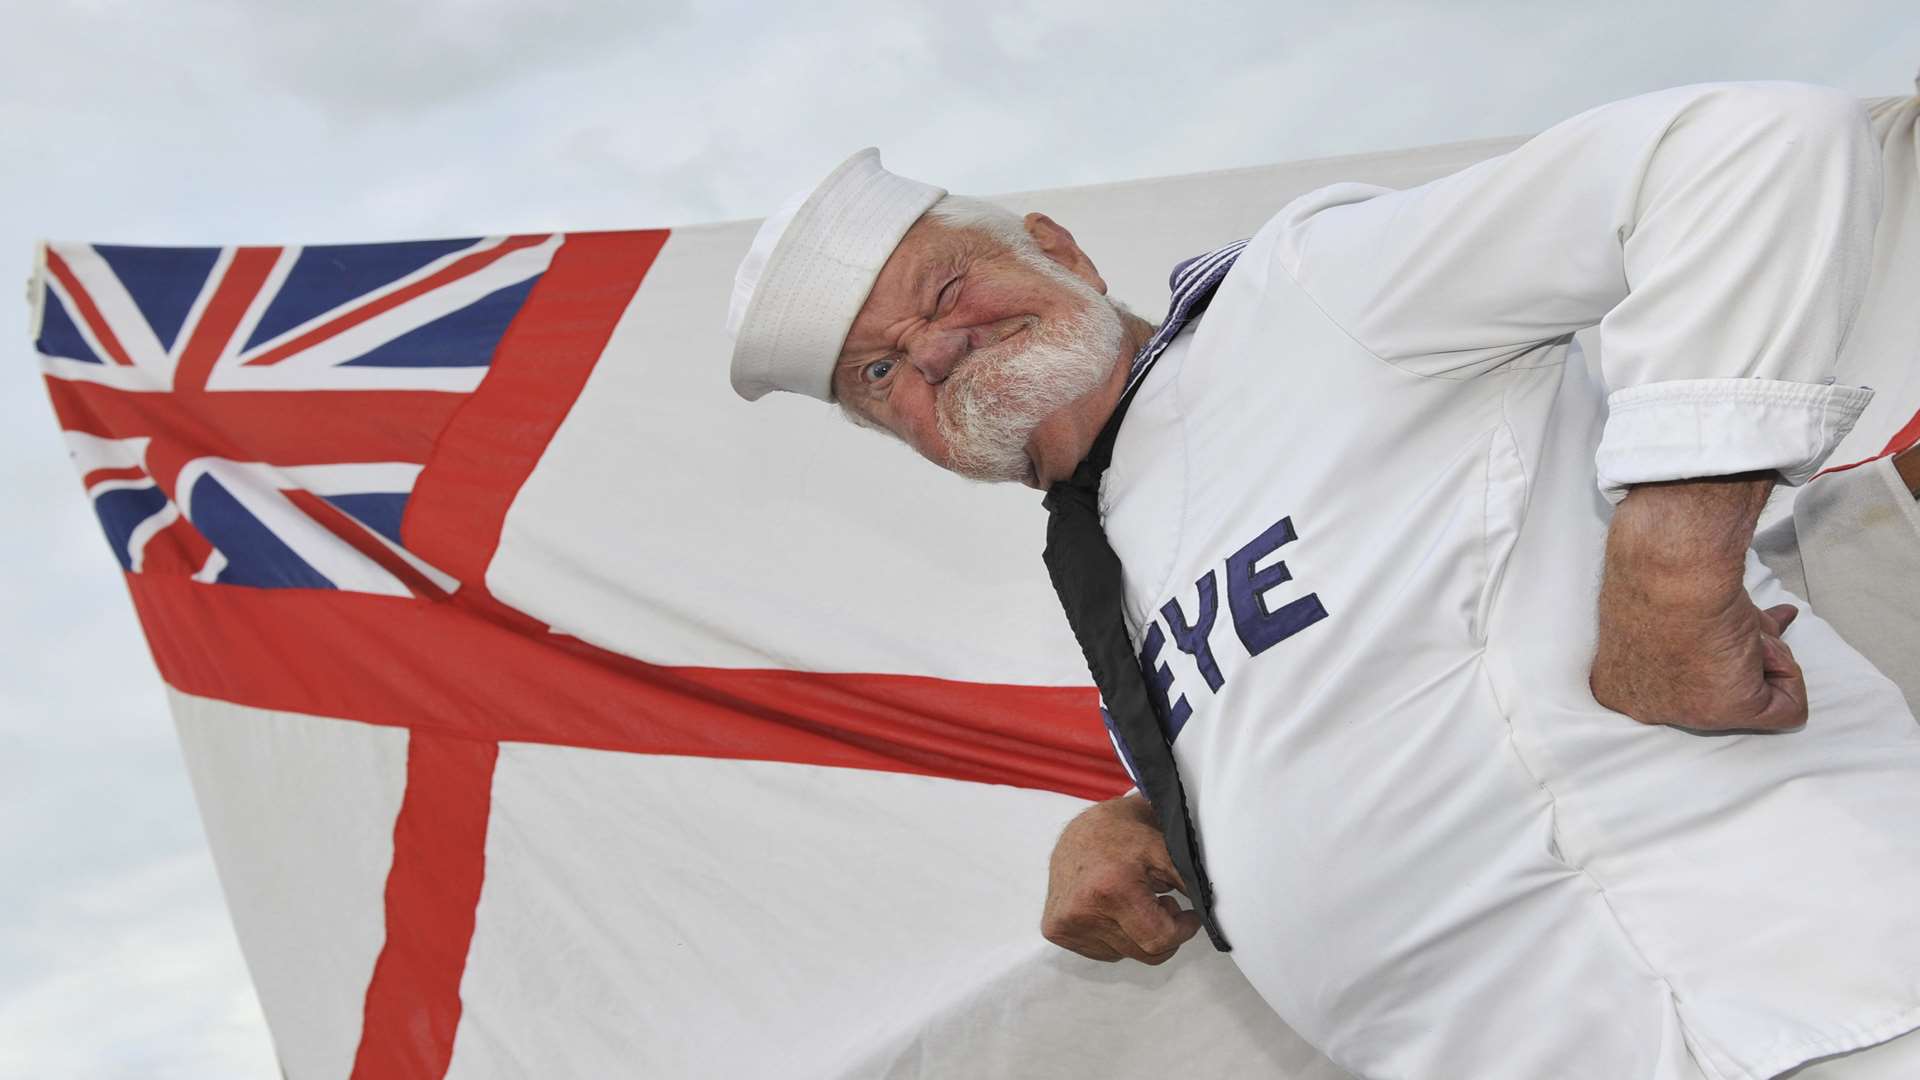 Ron Everett at Deal Carnival in 2015 when he said he would take part in the event until he was three figures and beyond